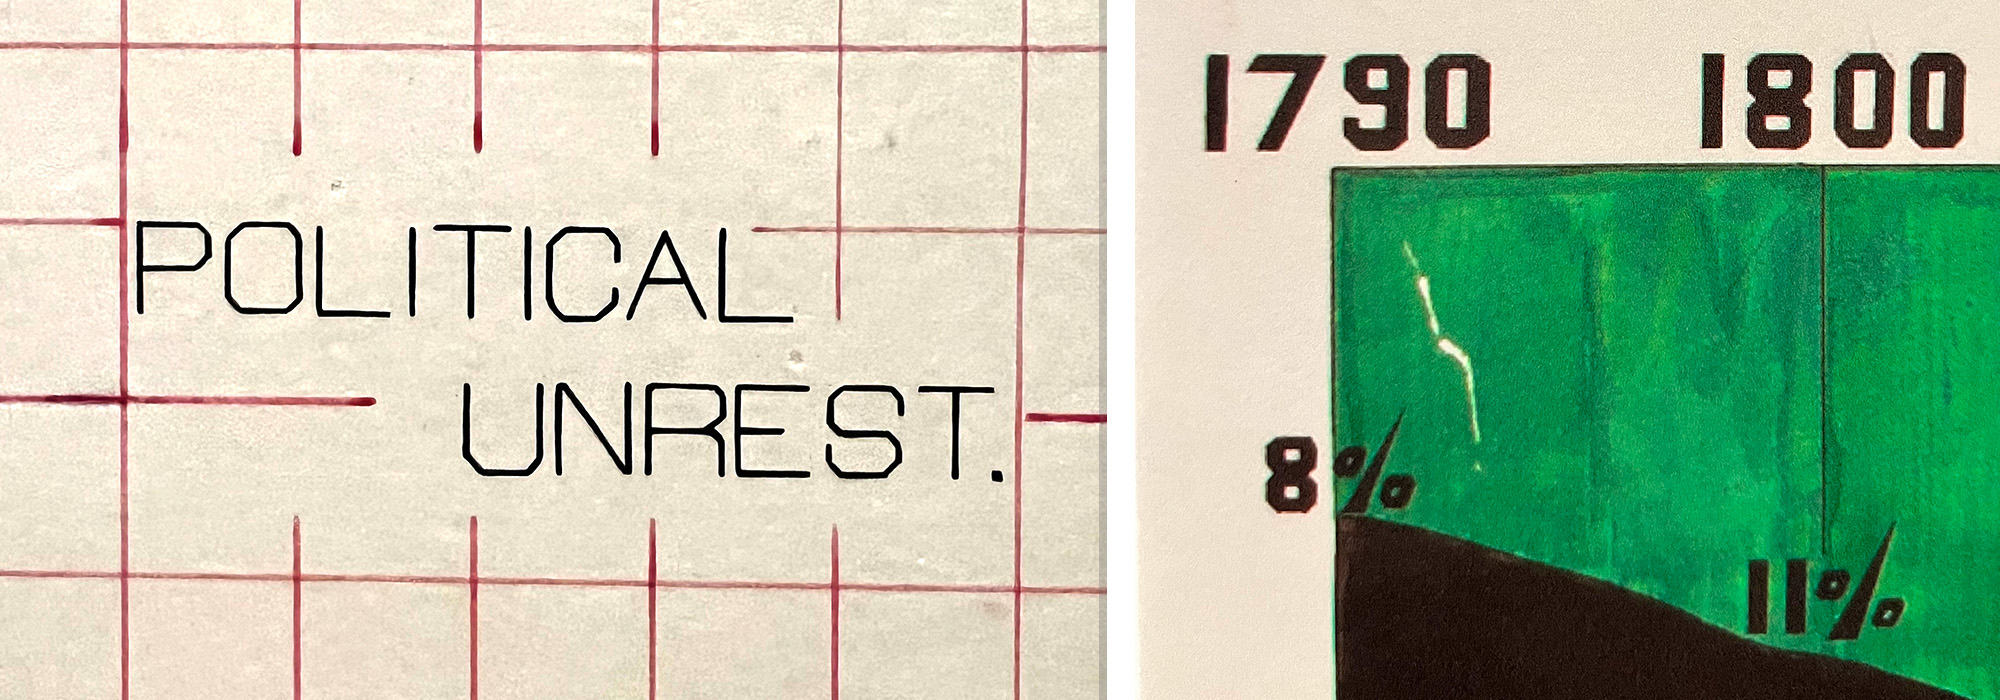 Two cropped data graphics are shown side-by-side, one with text that reads “POLITICAL UNREST” and the other with a green rectangle surrounded by numbers.